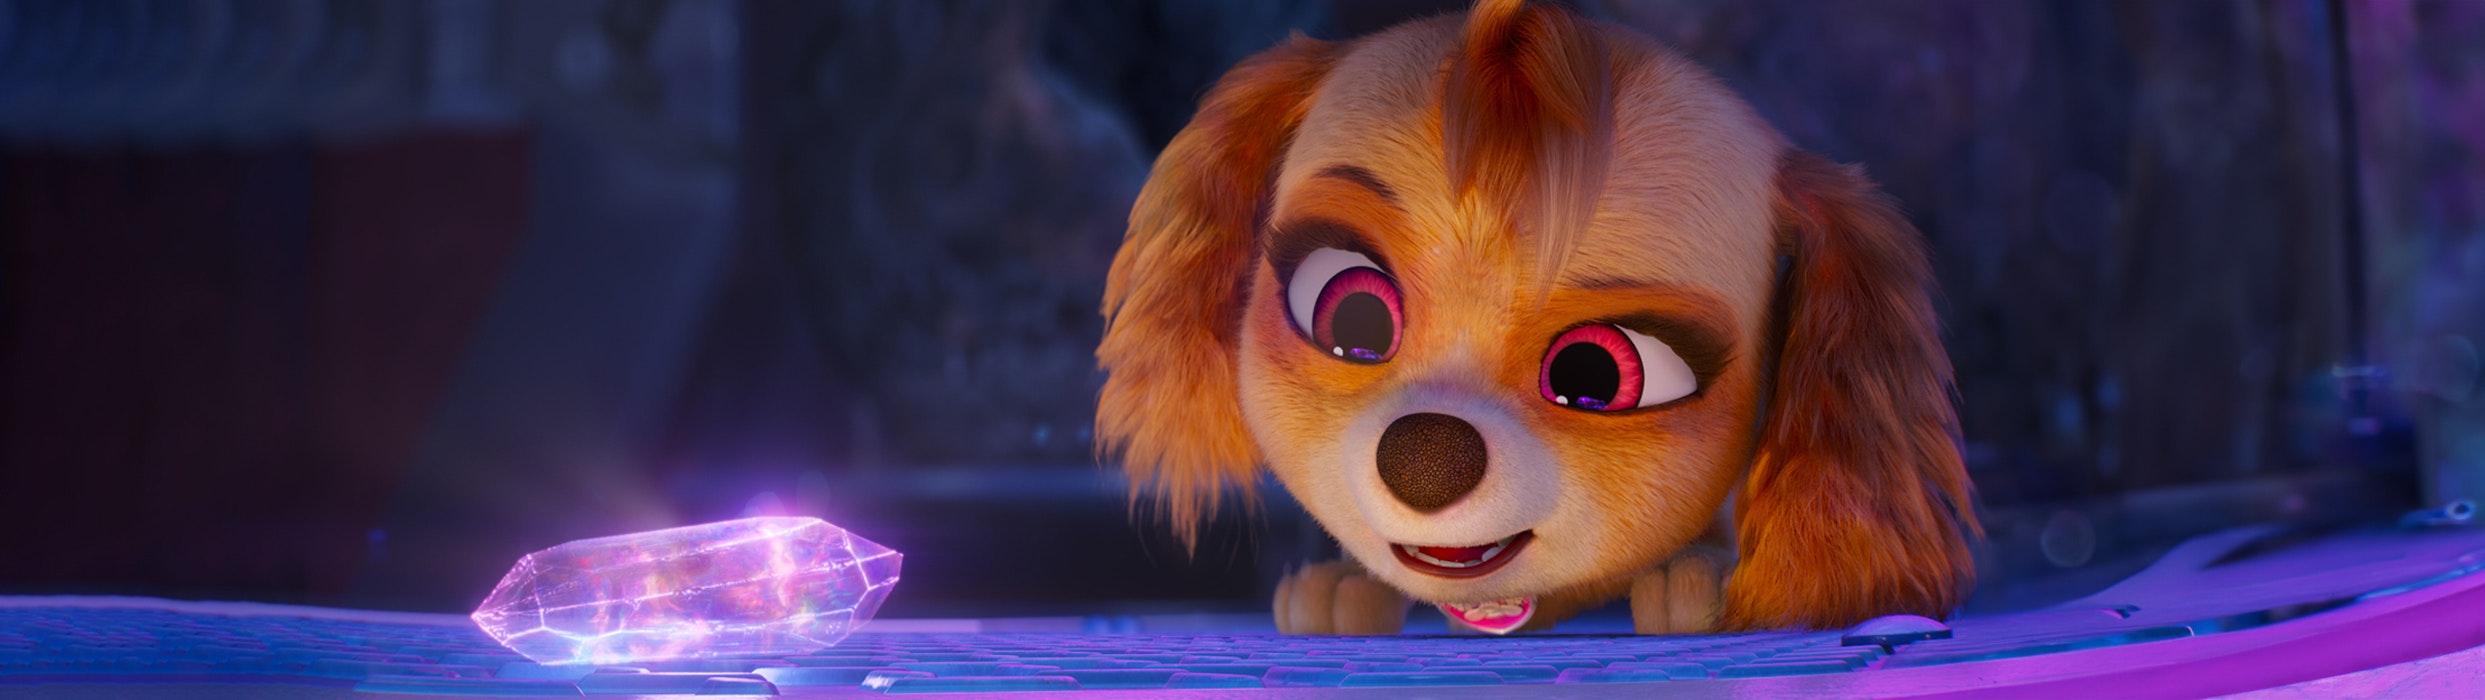 Animated girl puppy looks at glowing crystal in Paw Patrol 2: The Mighty Movie now showing at Harkins! Get your tickets today!